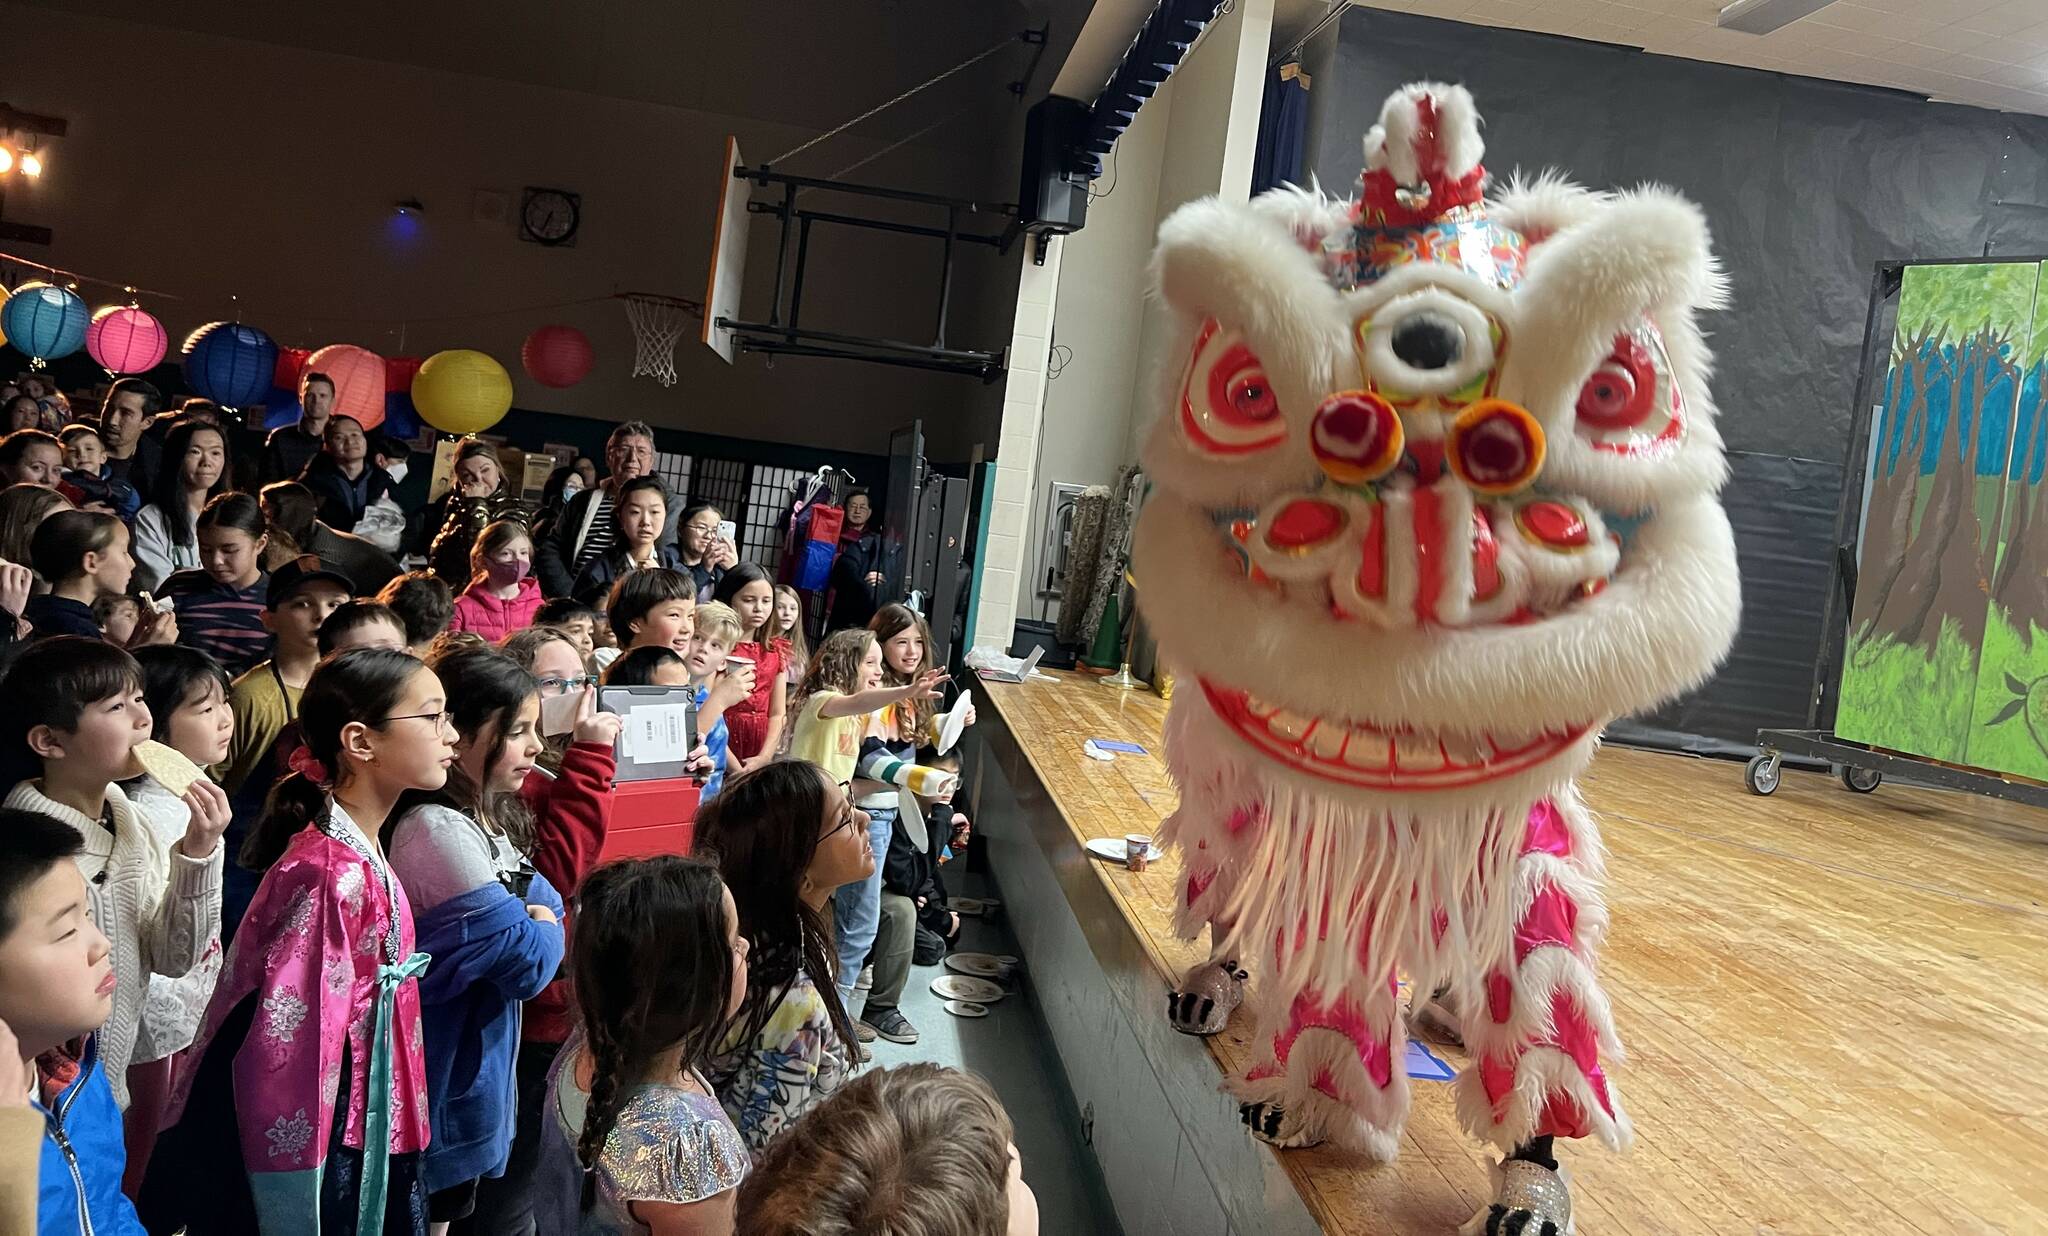 Families watch the Lion Dance performance. (Photos courtesy of Soyun Chow)